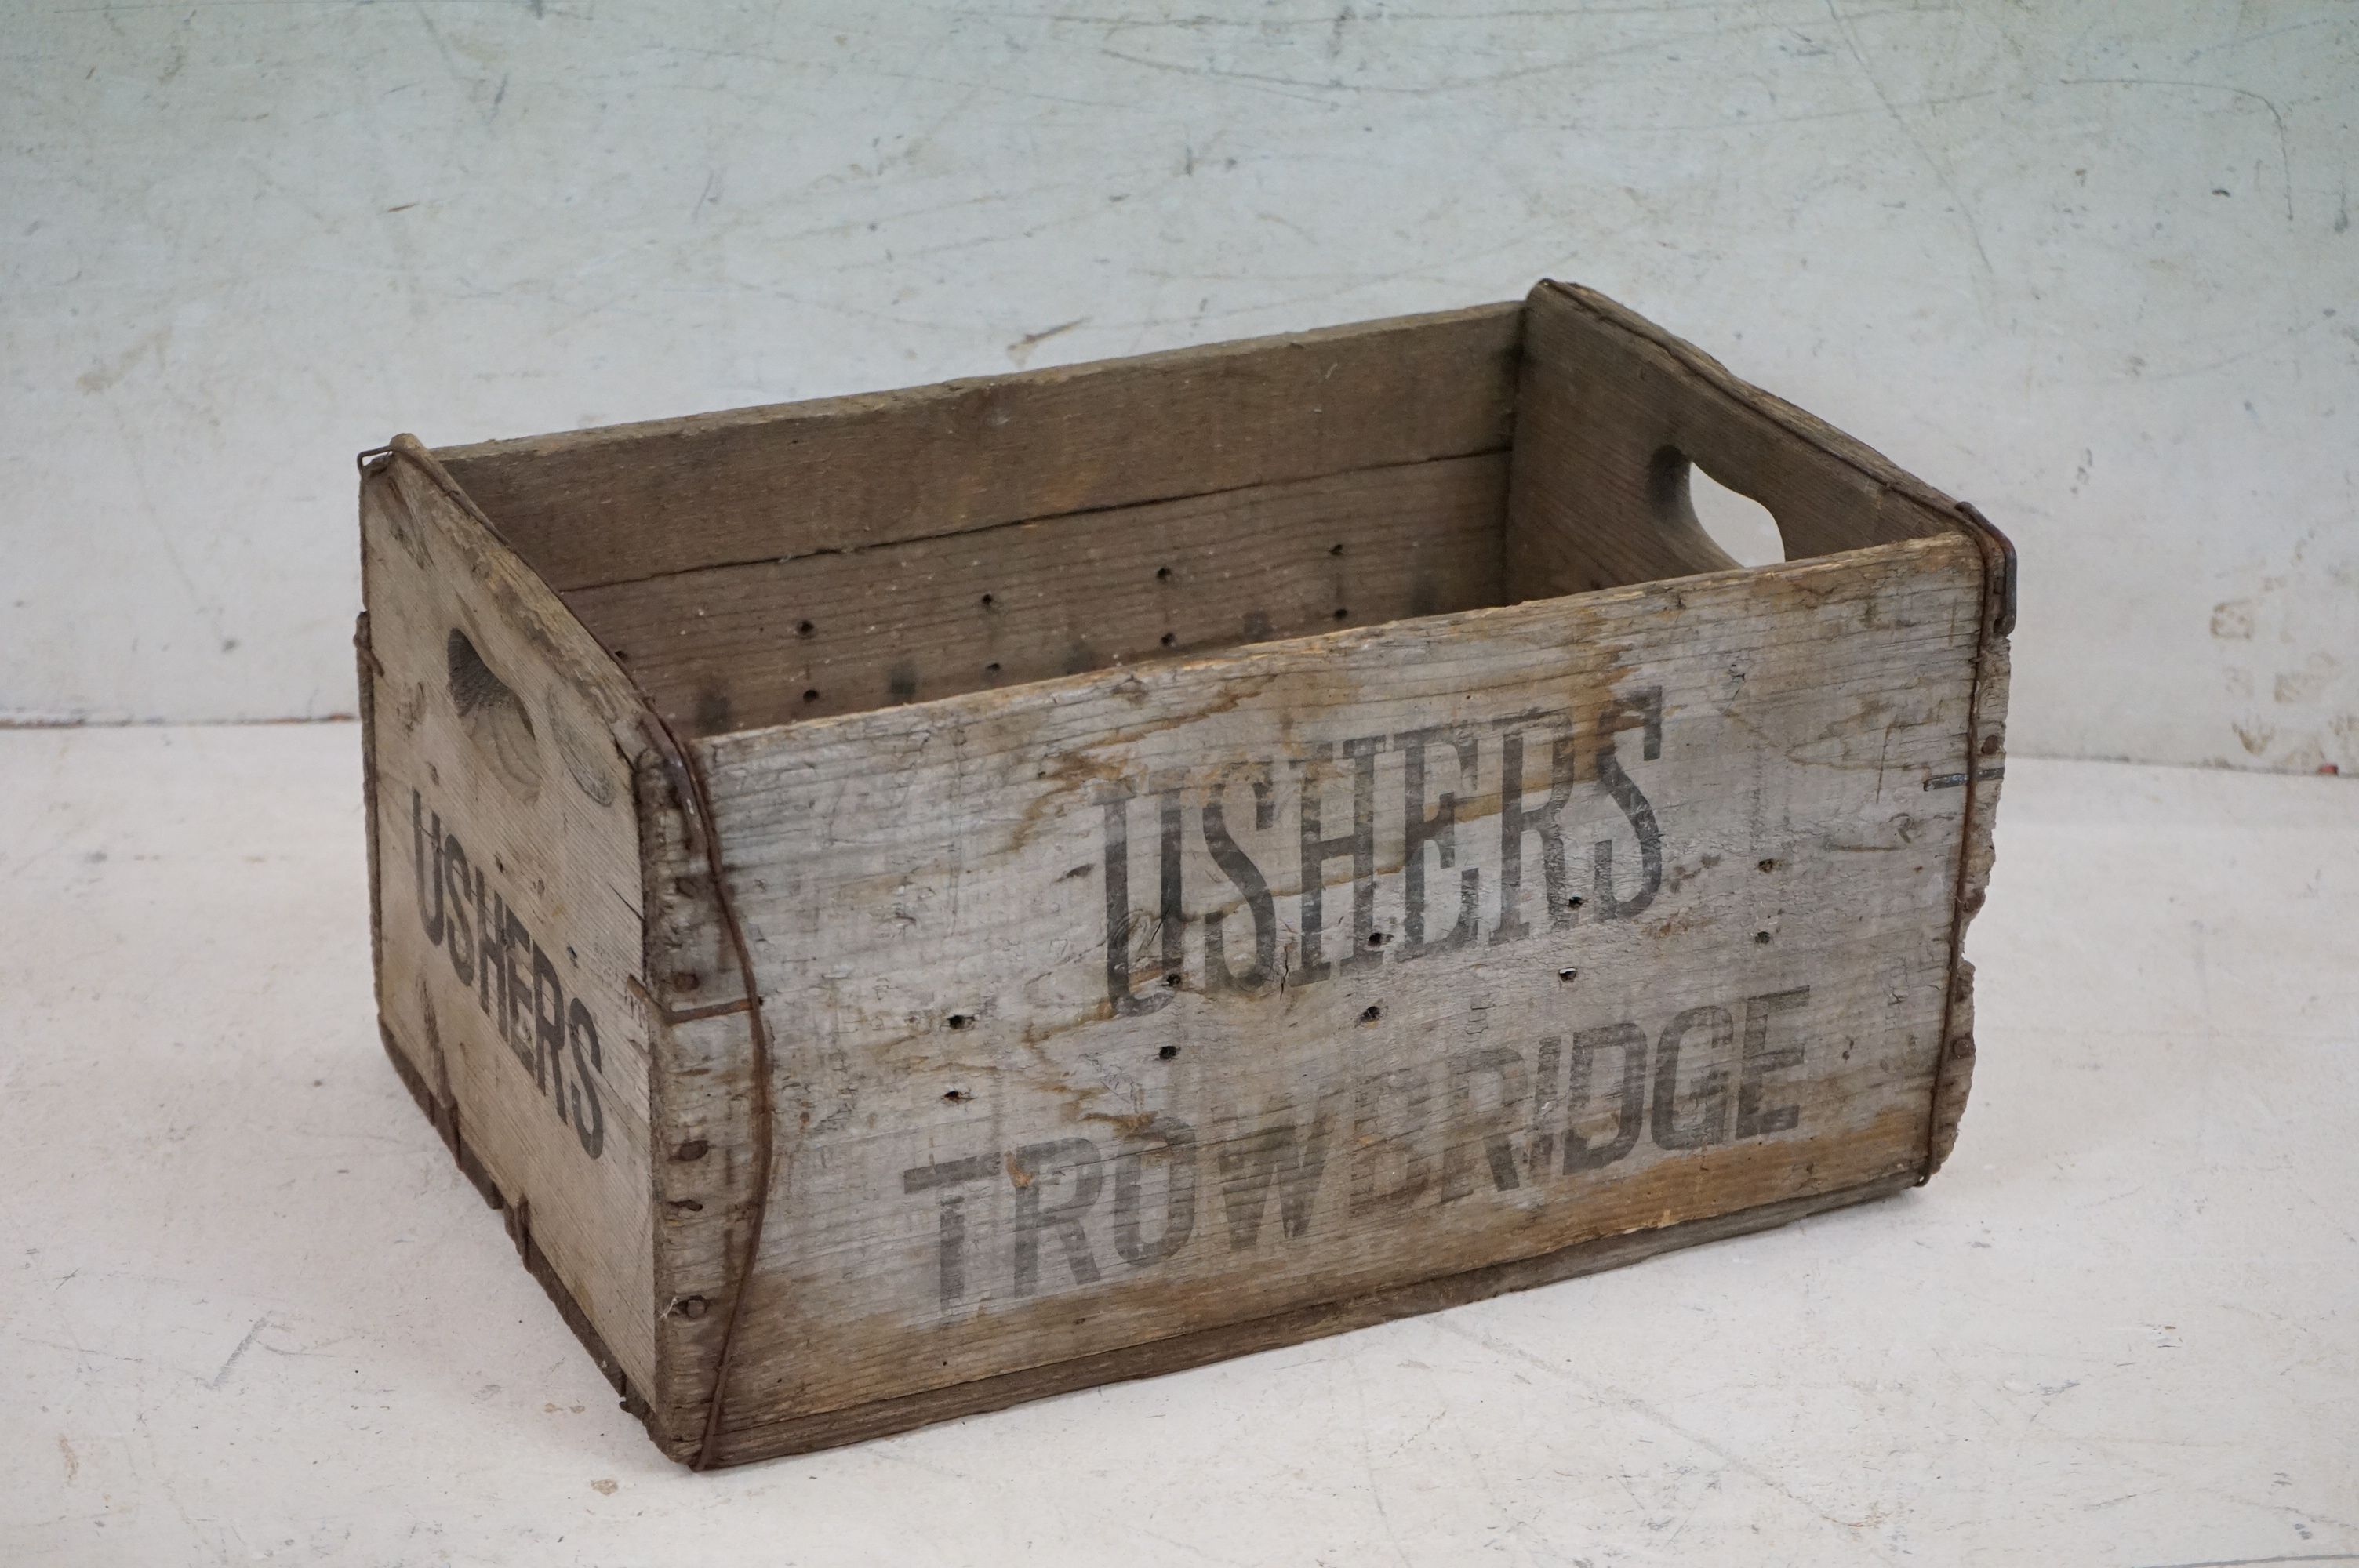 Early to Mid 20th century ' Ushers of Trowbridge ' Wooden Beer Crate, 23cm high x 44cm long - Image 3 of 6